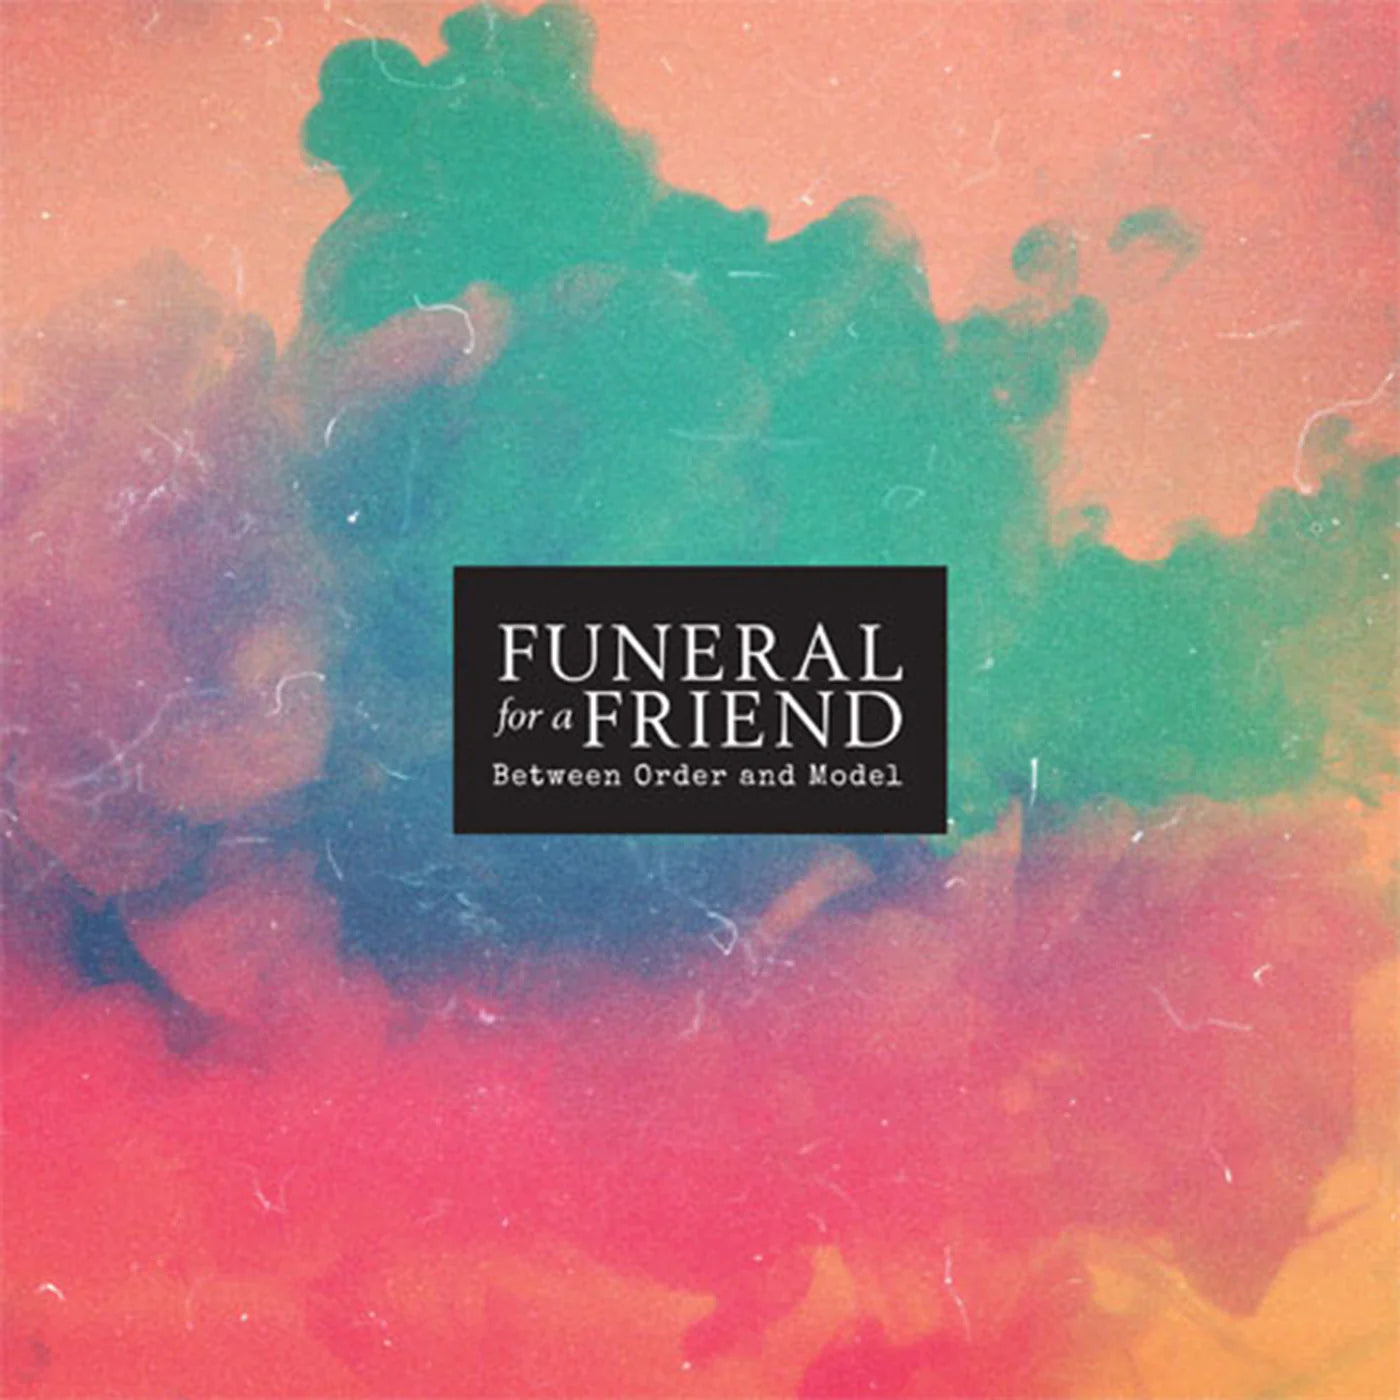 FUNERAL FOR A FRIEND "Between Order And Model" CD